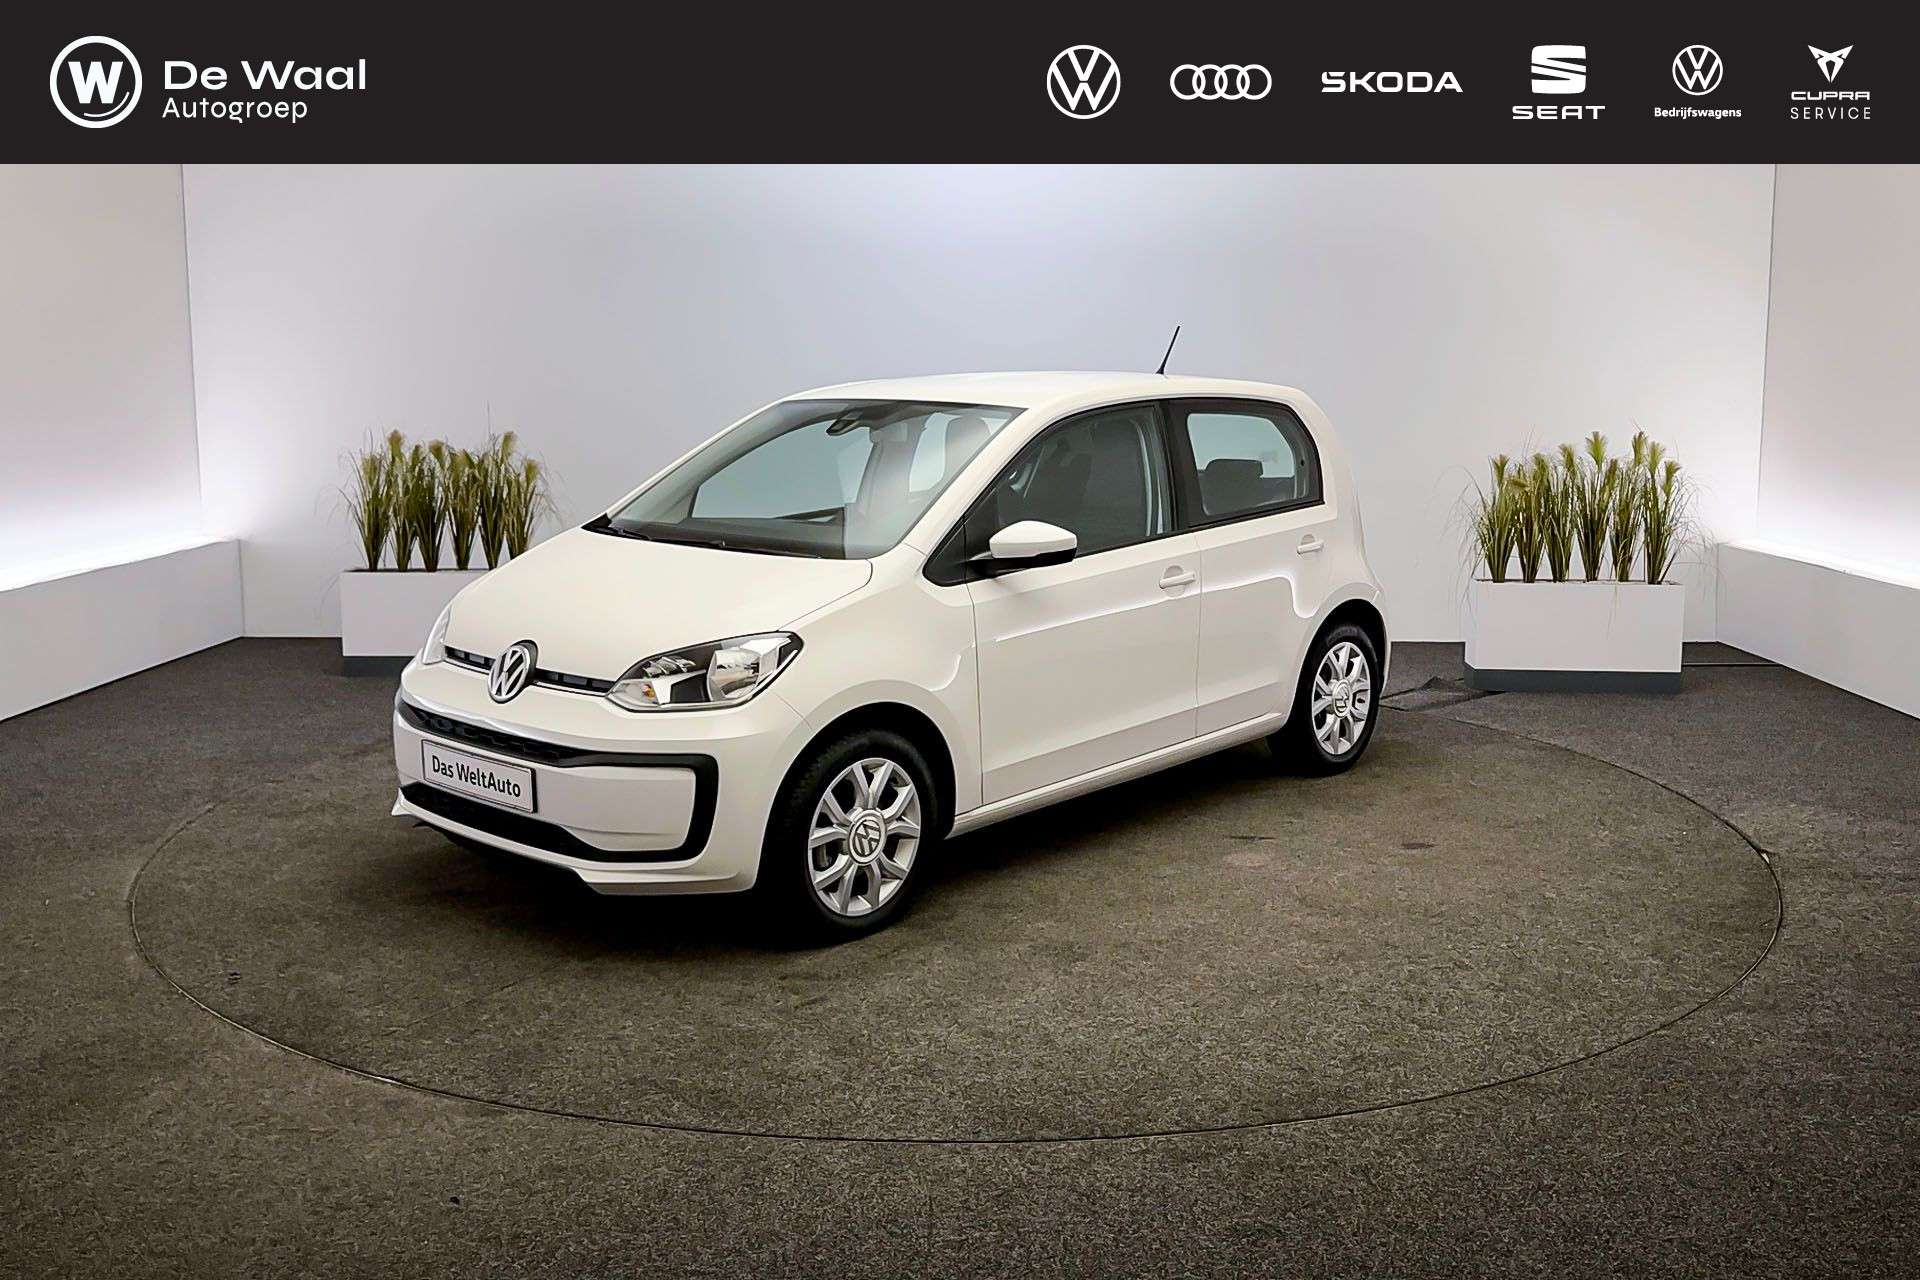 Volkswagen up! Compact in White used in CULEMBORG for € 10,395.-